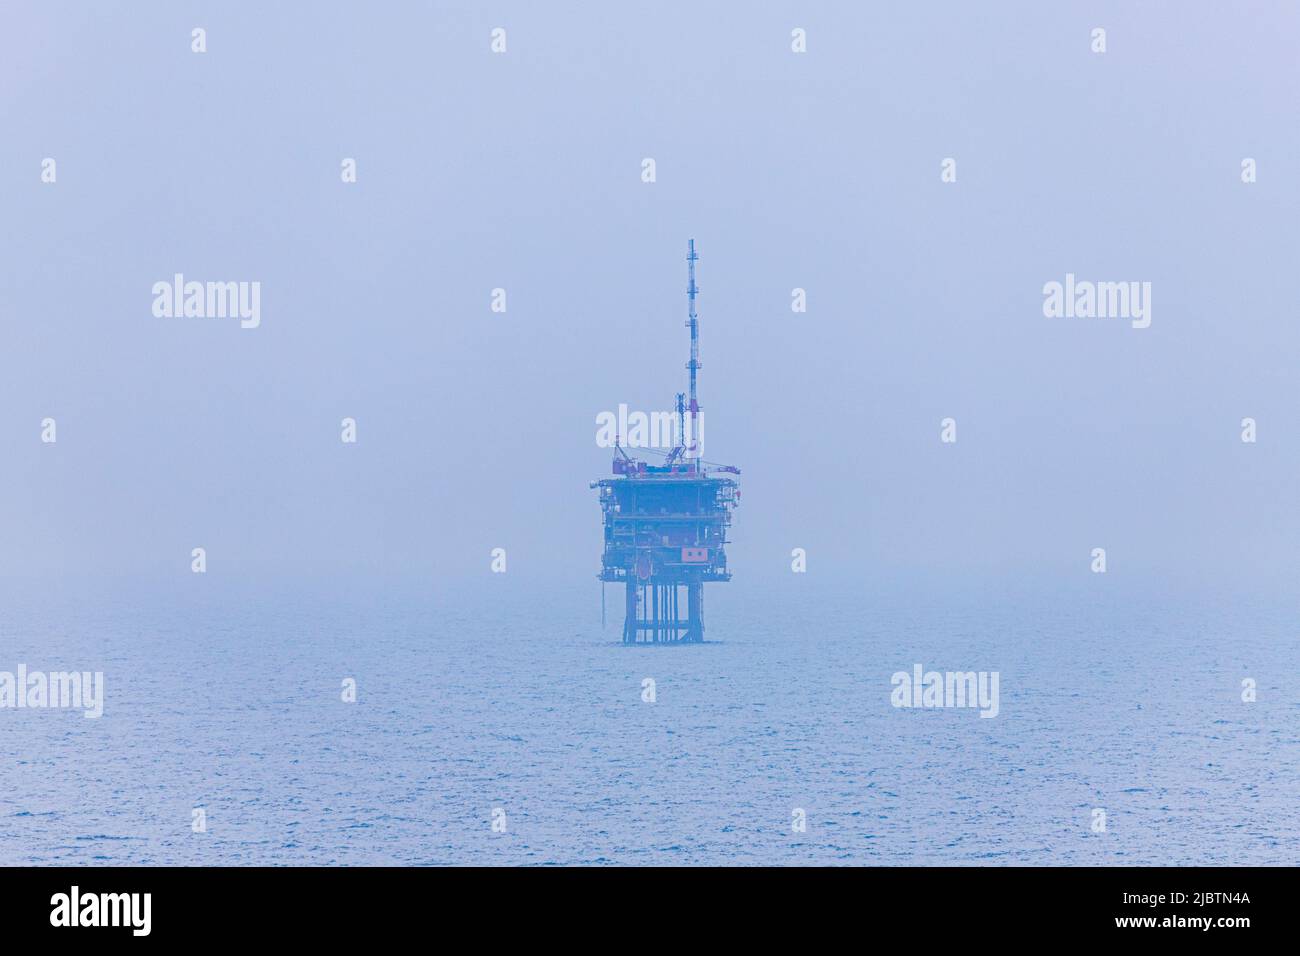 A misty view of an oil or gas platform in the North Sea halfway between Essex and The Netherlands Stock Photo